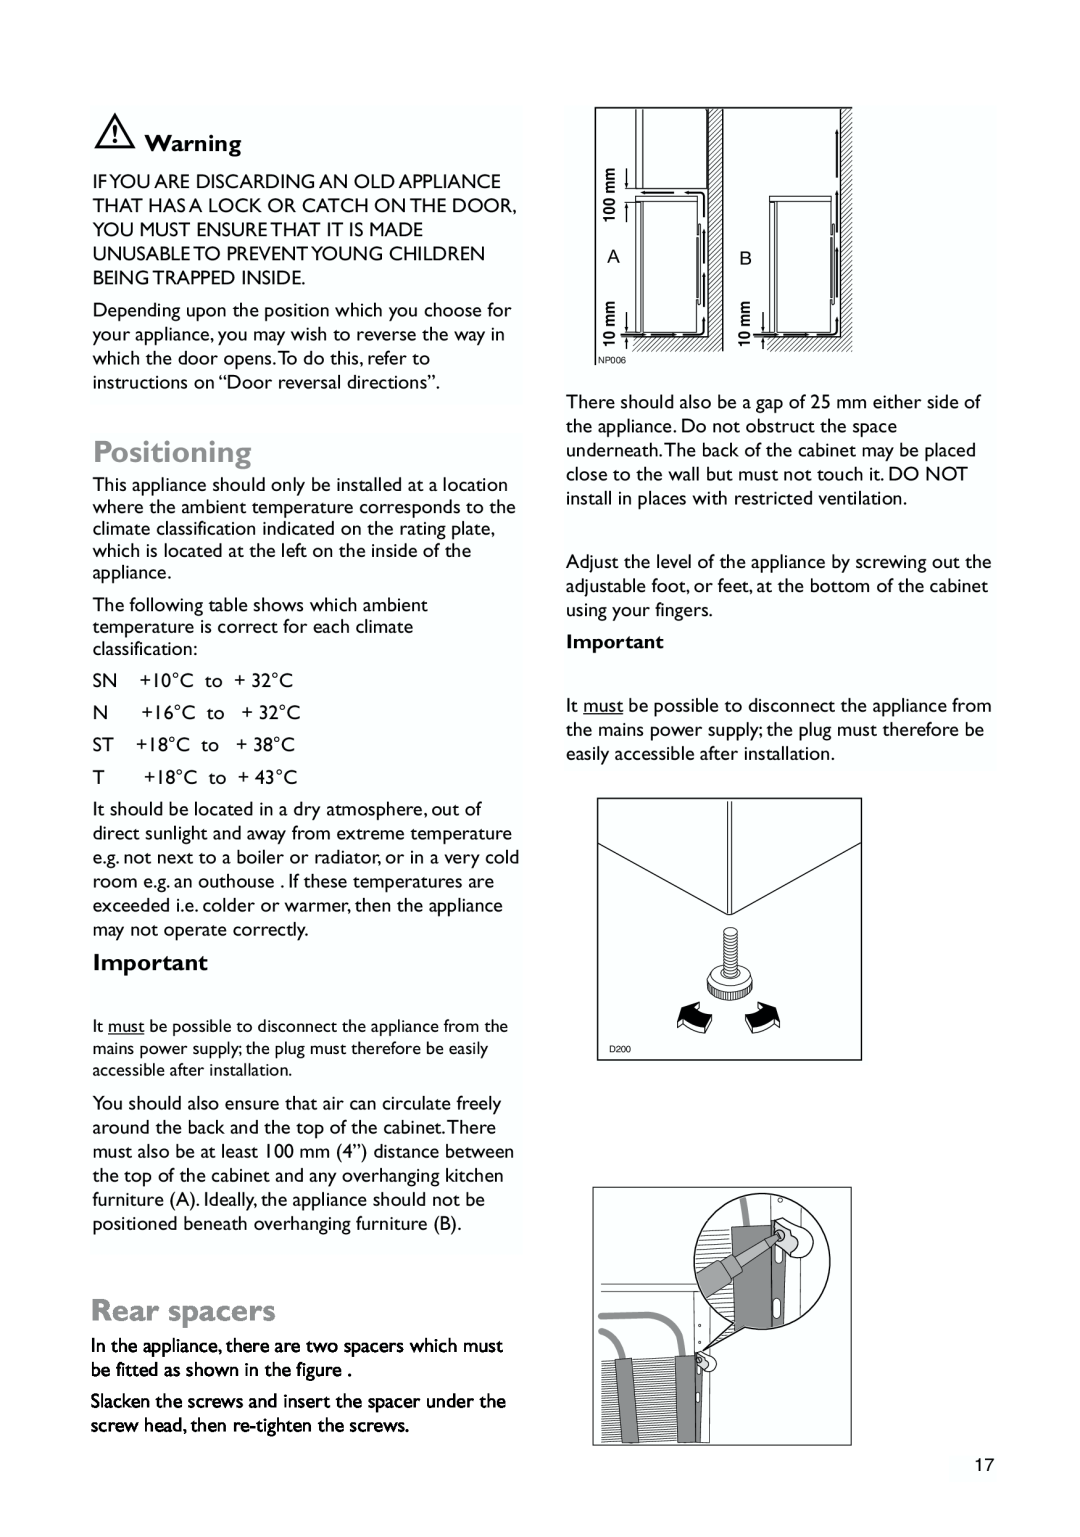 John Lewis JLFZW1810 instruction manual Positioning, Rear spacers 